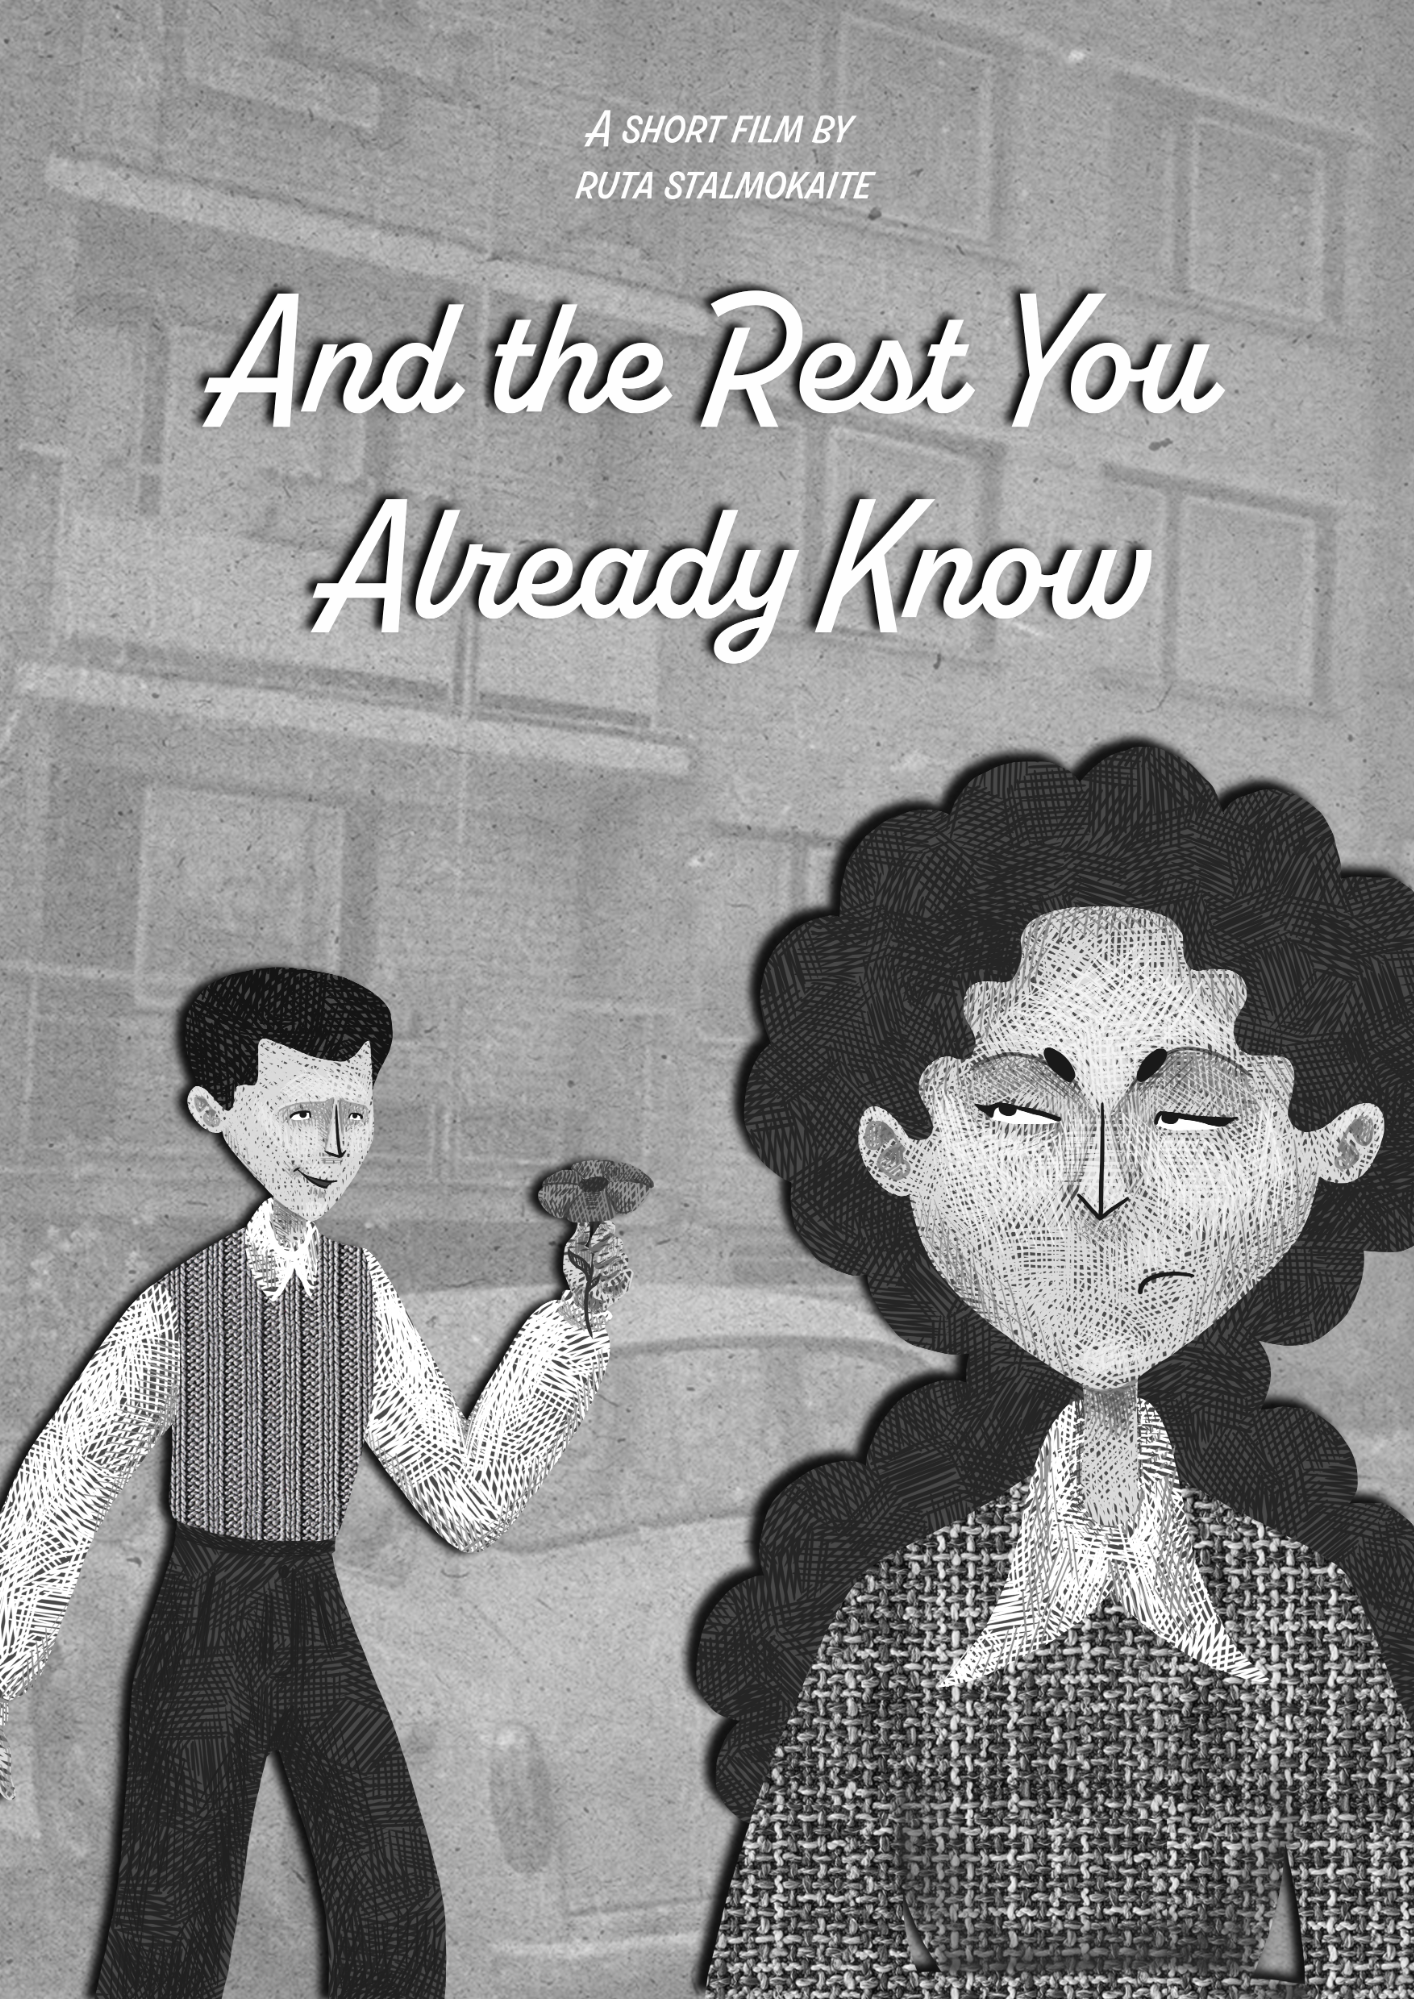 Teaser Poster for the animated film “And the Rest You Already Know”